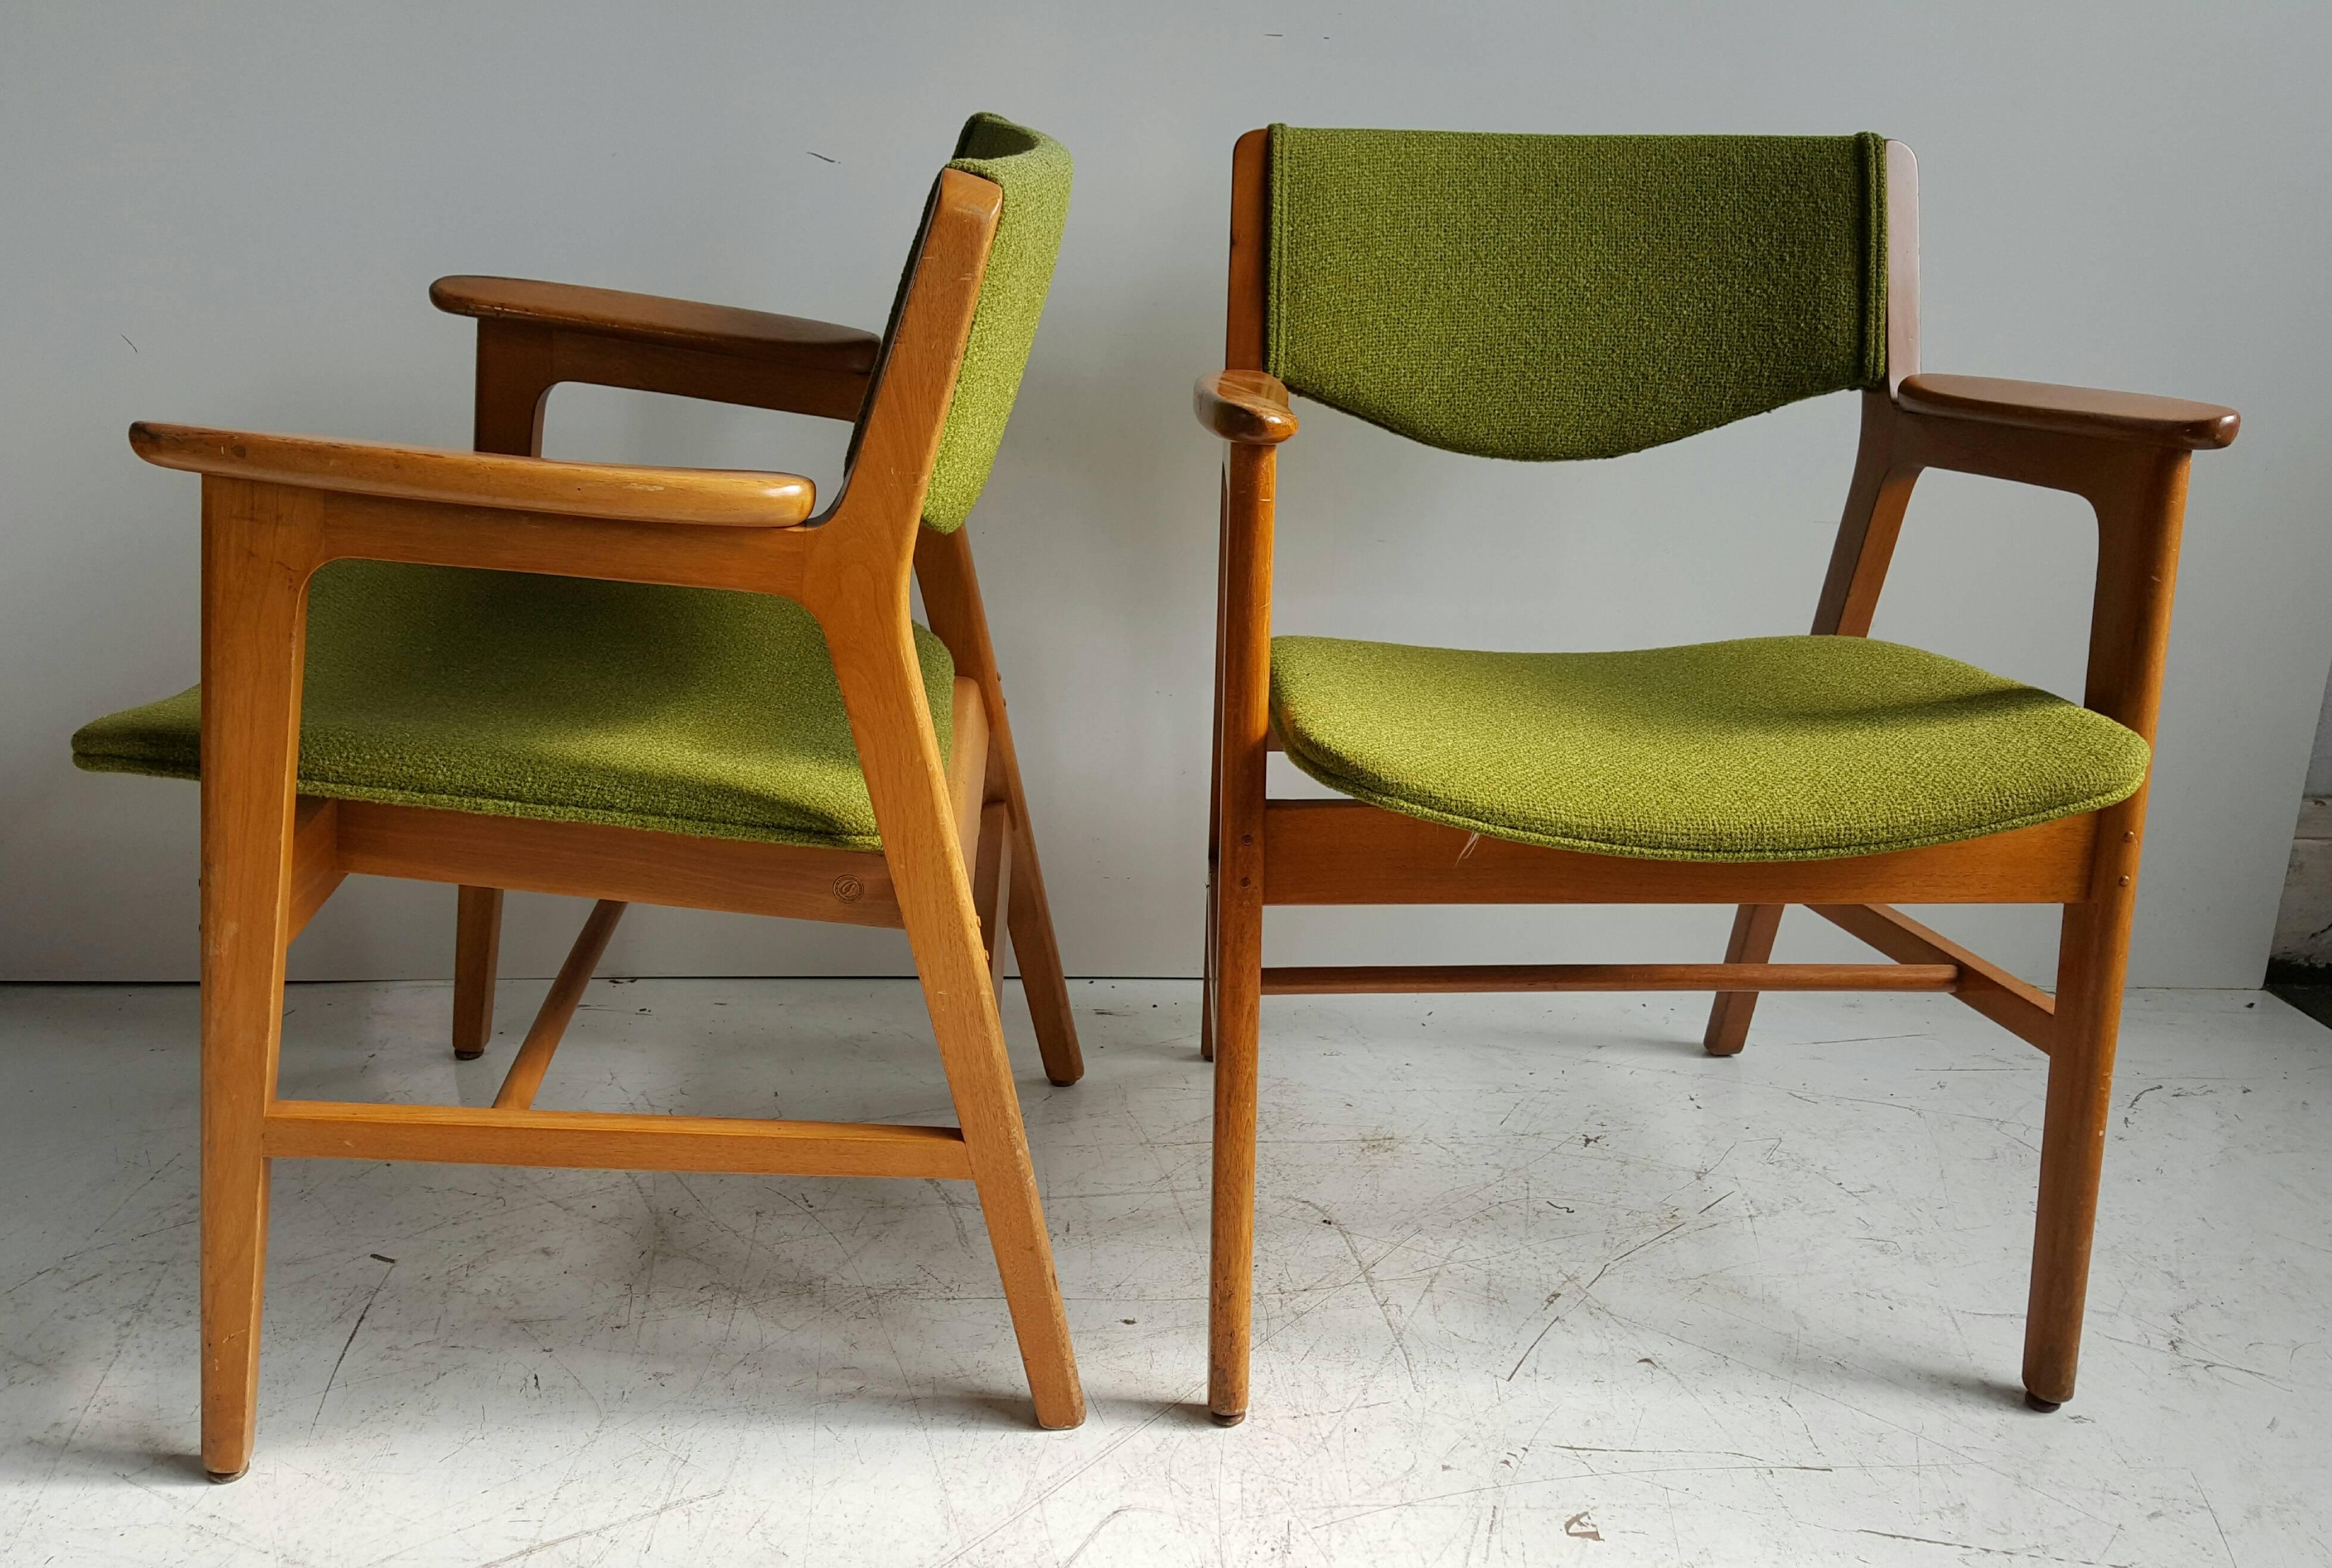 20th Century Classic Mid-Century Modern Armchairs, Manufactured by W.H. Gunlocke Chair Co.